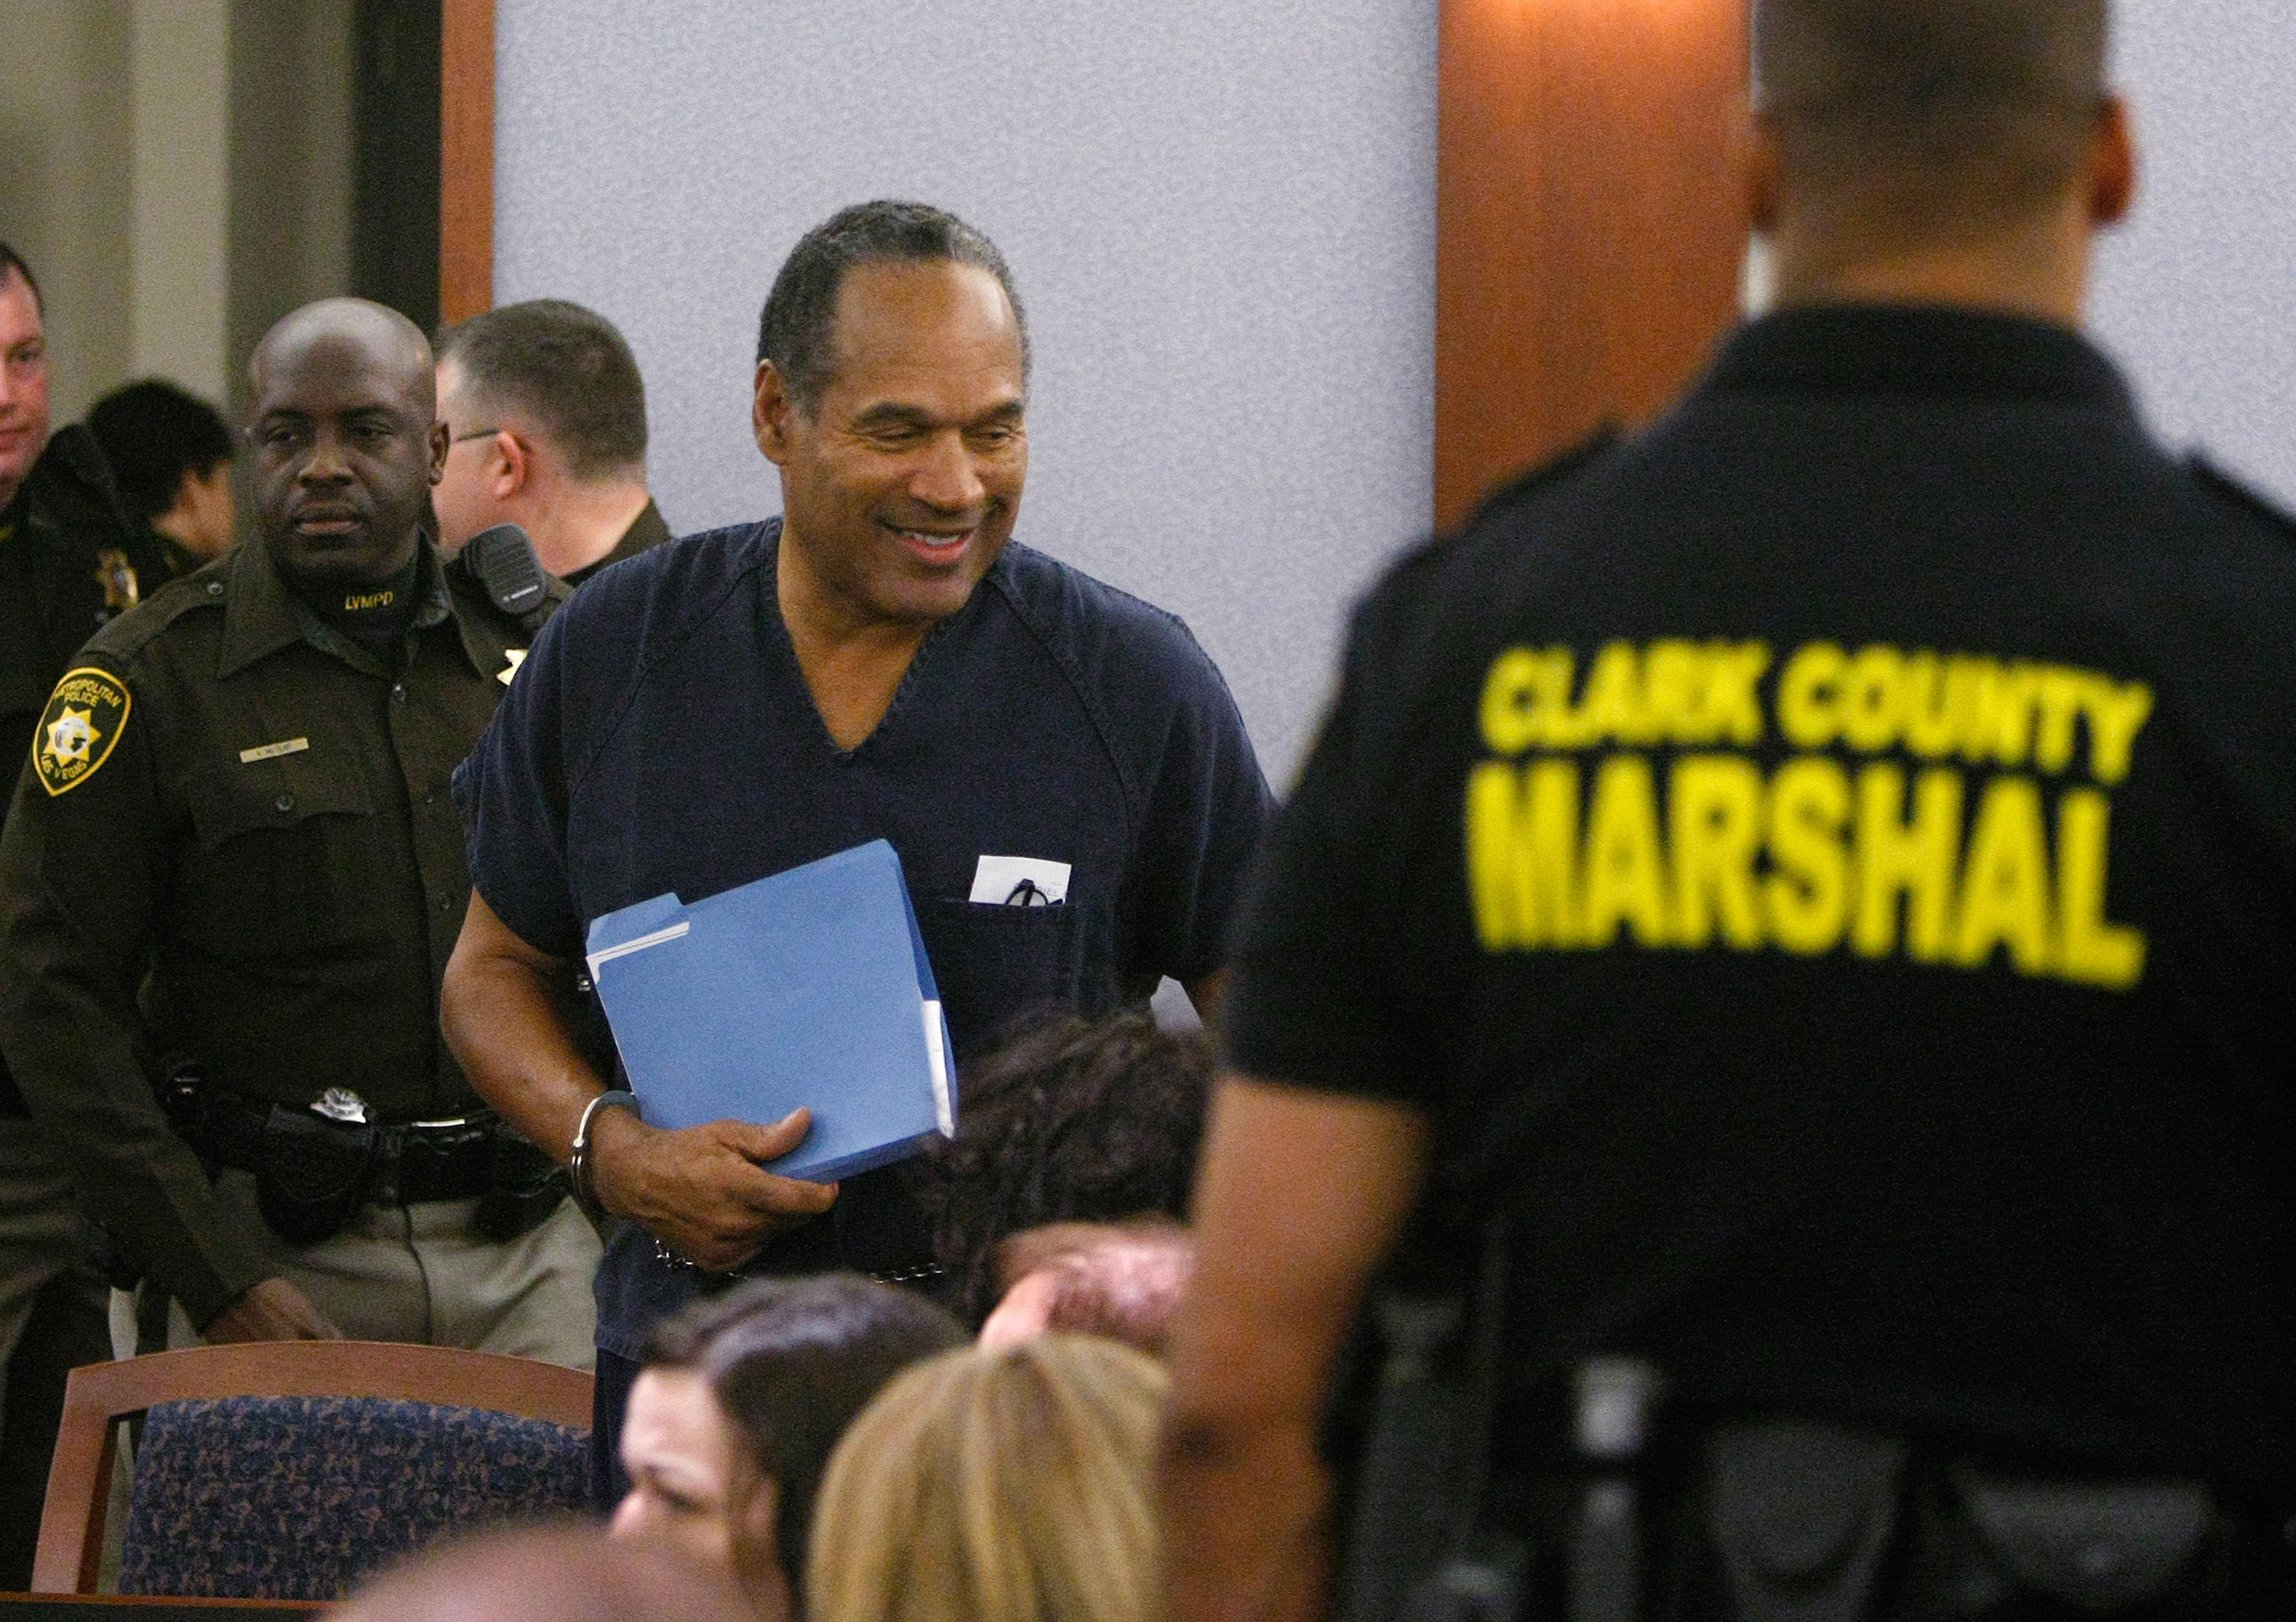 LAS VEGAS - DECEMBER 5:  O.J. Simpson arrives at the Clark County Regional Justice Center December 5, 2008 in Las Vegas, Nevada.  Simpson and co-defendant Clarence 'C.J.' Stewart were sentenced on 12 charges, including felony kidnapping, armed robbery and